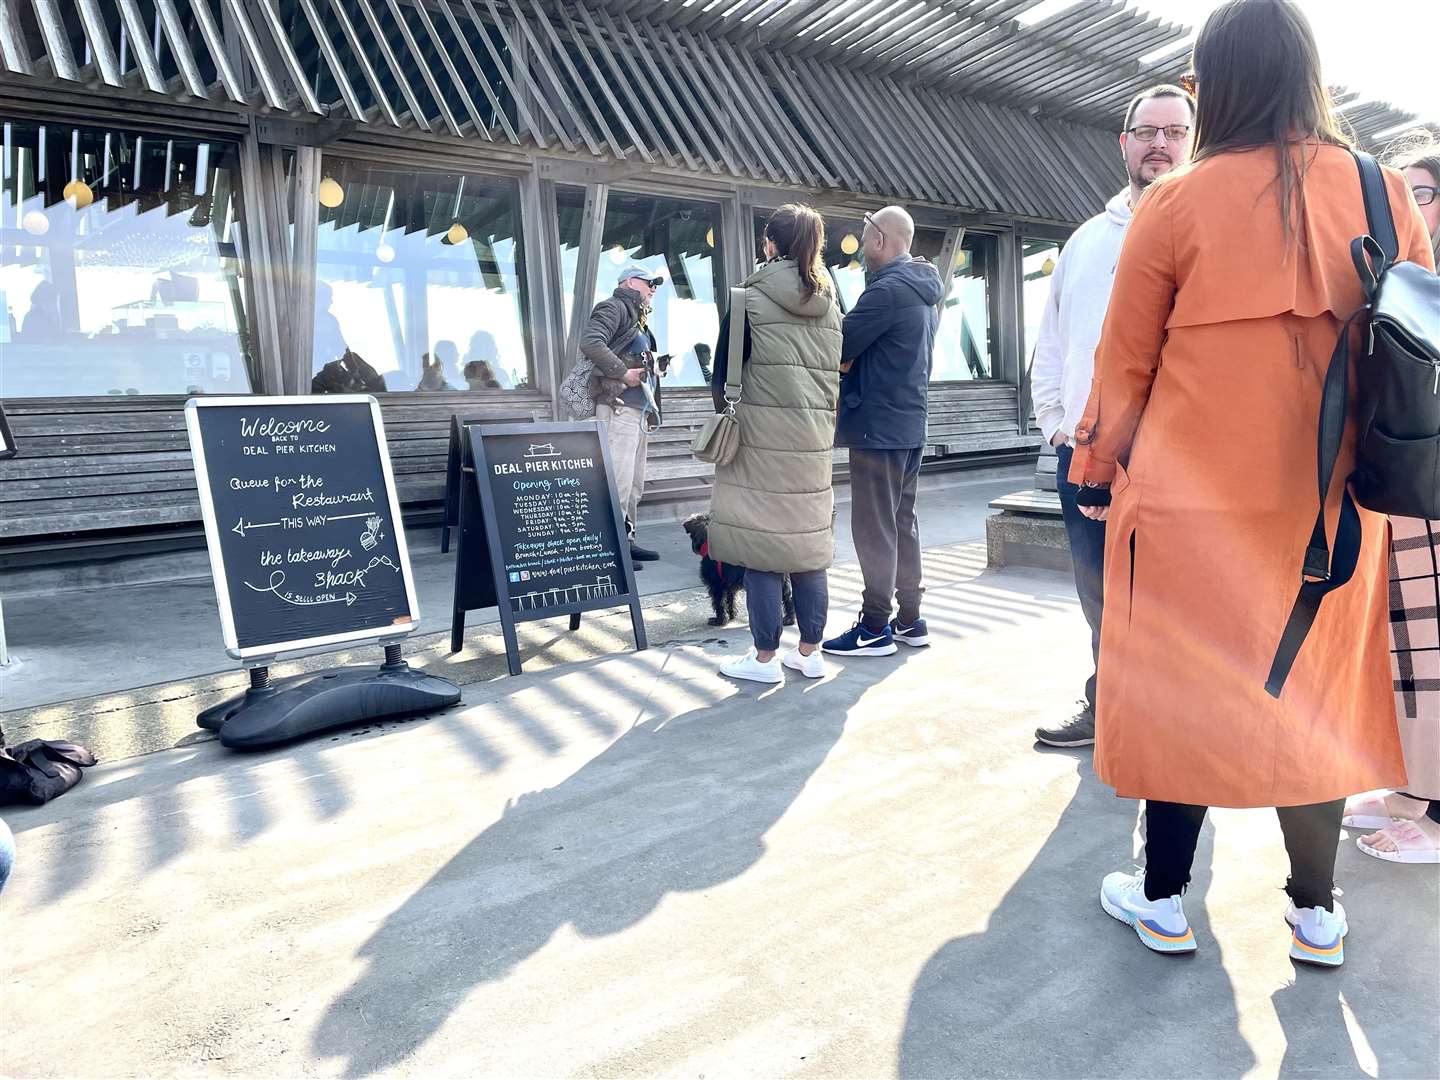 You can expect to have to queue for a table at Deal Pier Kitchen